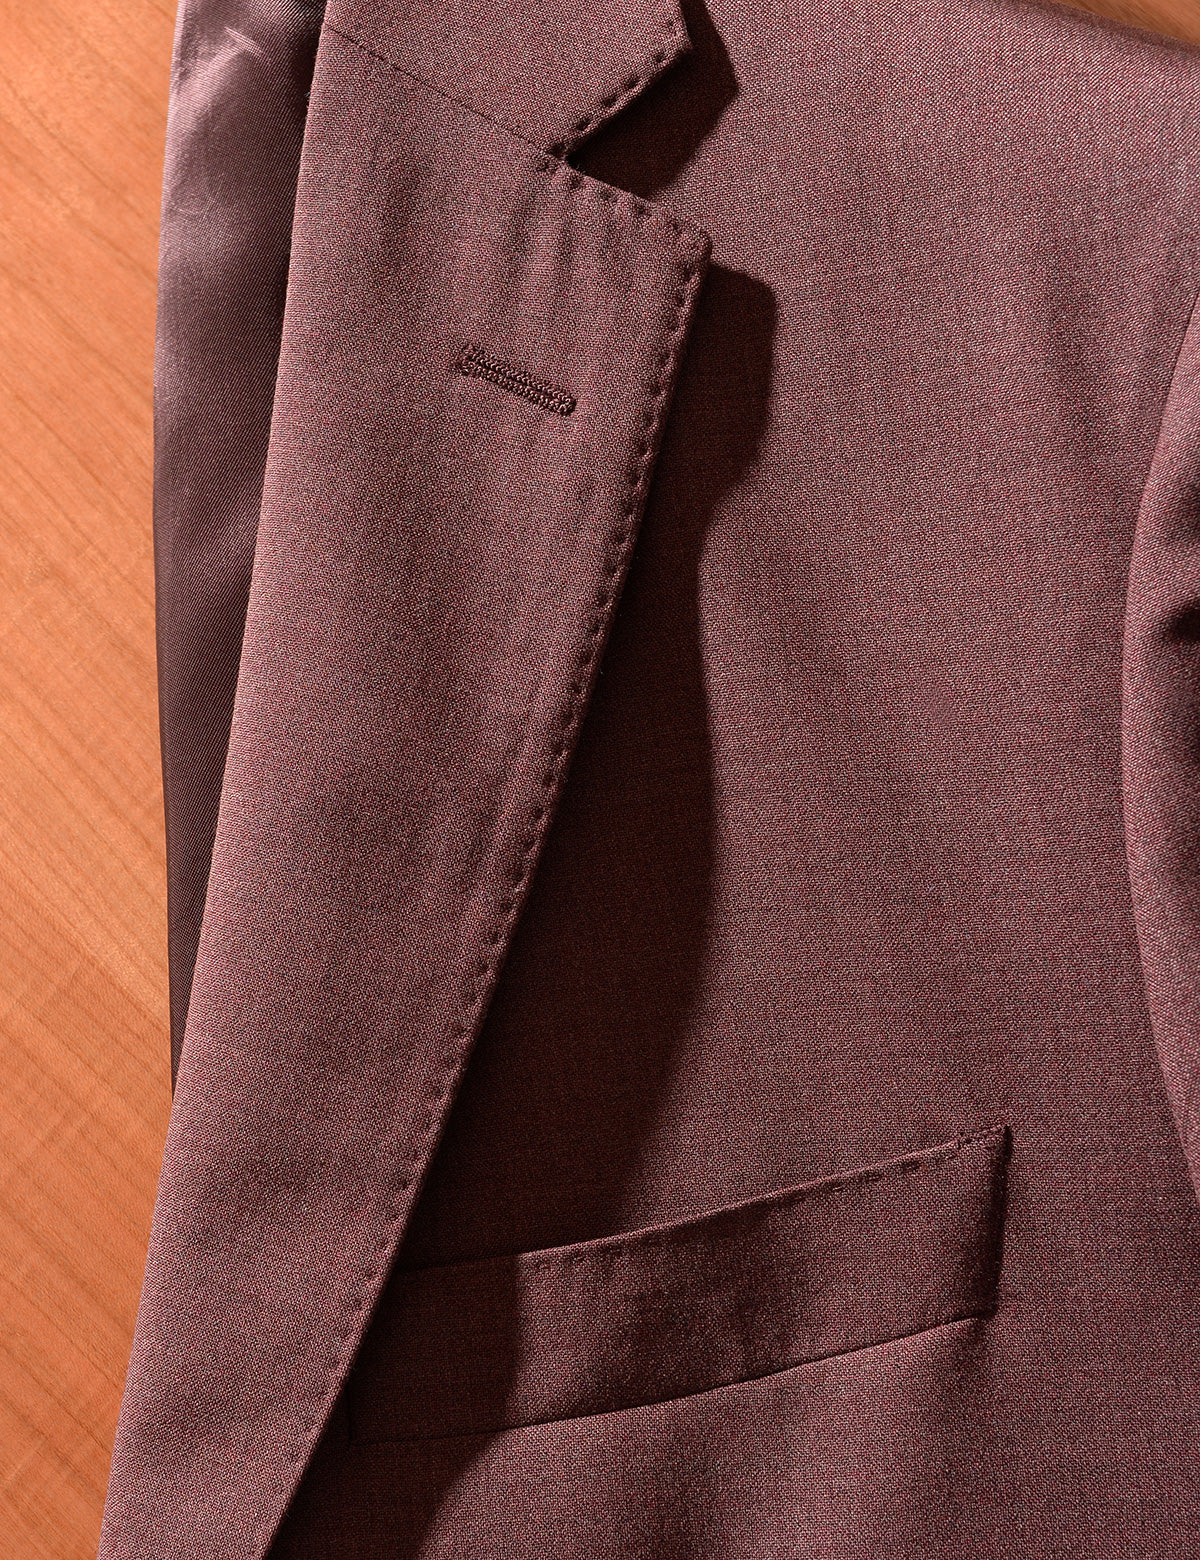 Detail shot of Brooklyn Tailors BKT50 Tailored Jacket in 14.5 Micron Mouliné - Cordovan showing lapel, pocket, and fabric texture